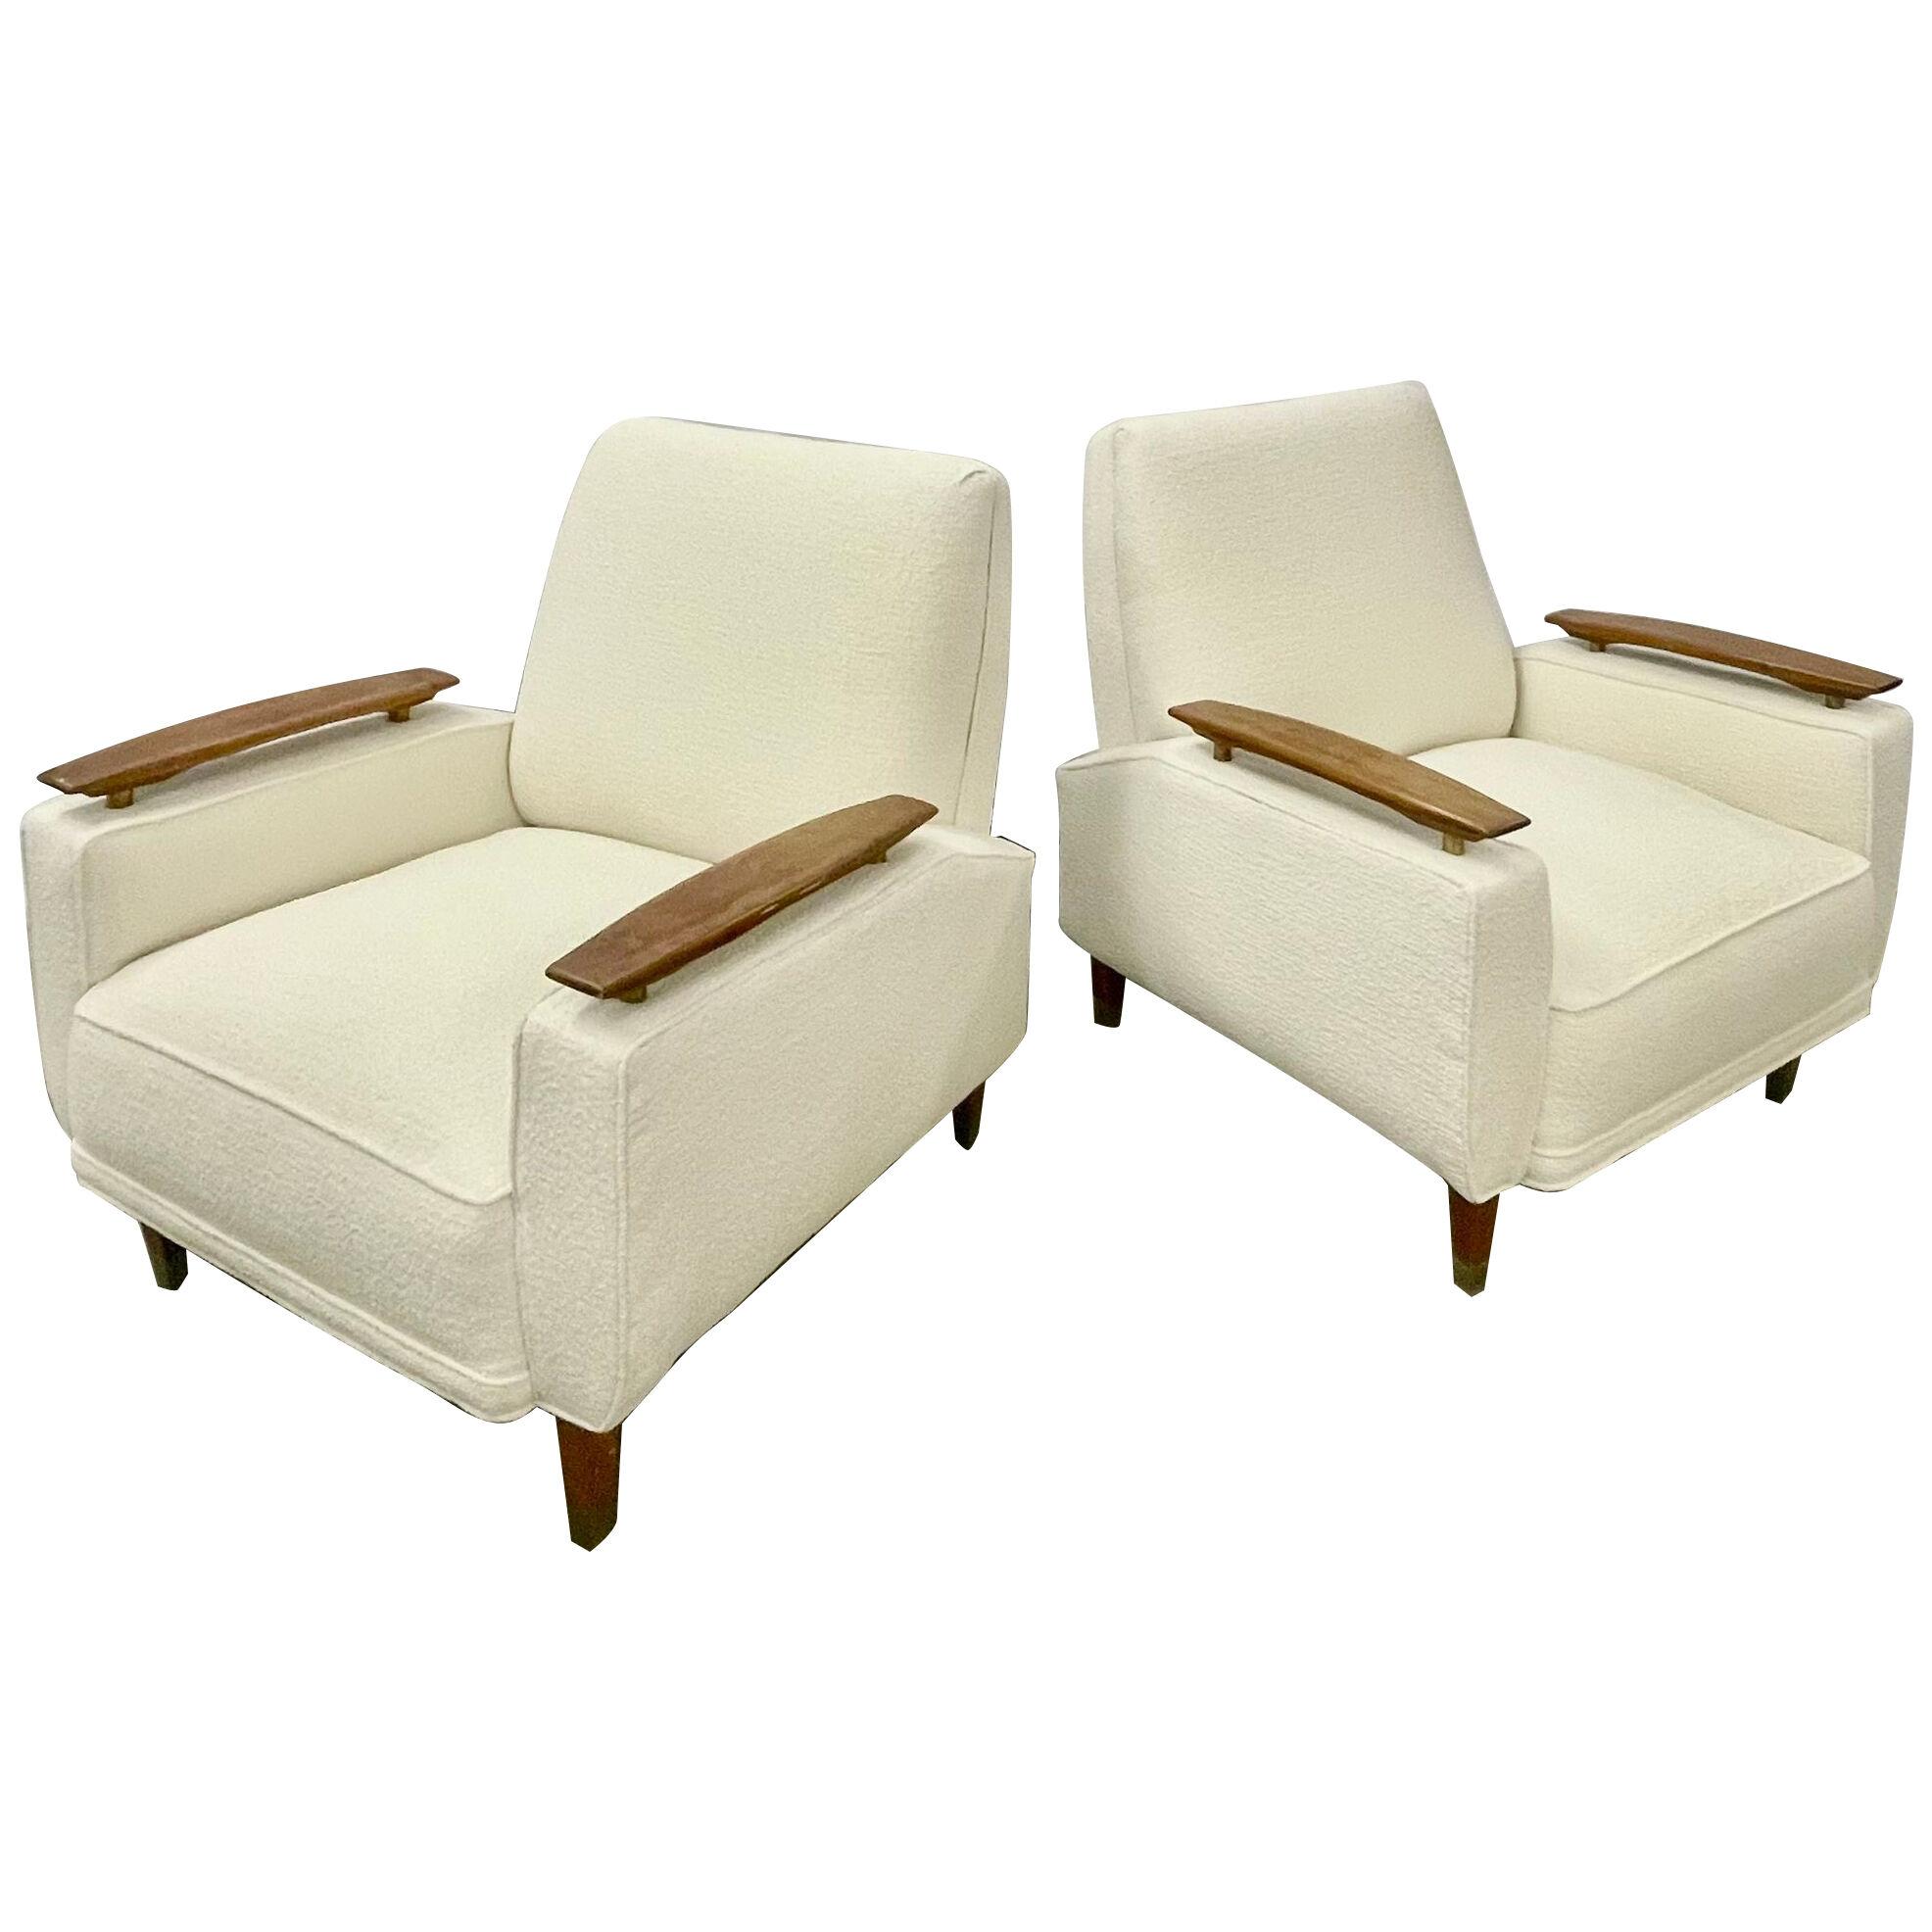 Pair of Mid Century Modern Lounge Chairs, Floating Arms, Bronze Sabots, Bouclé